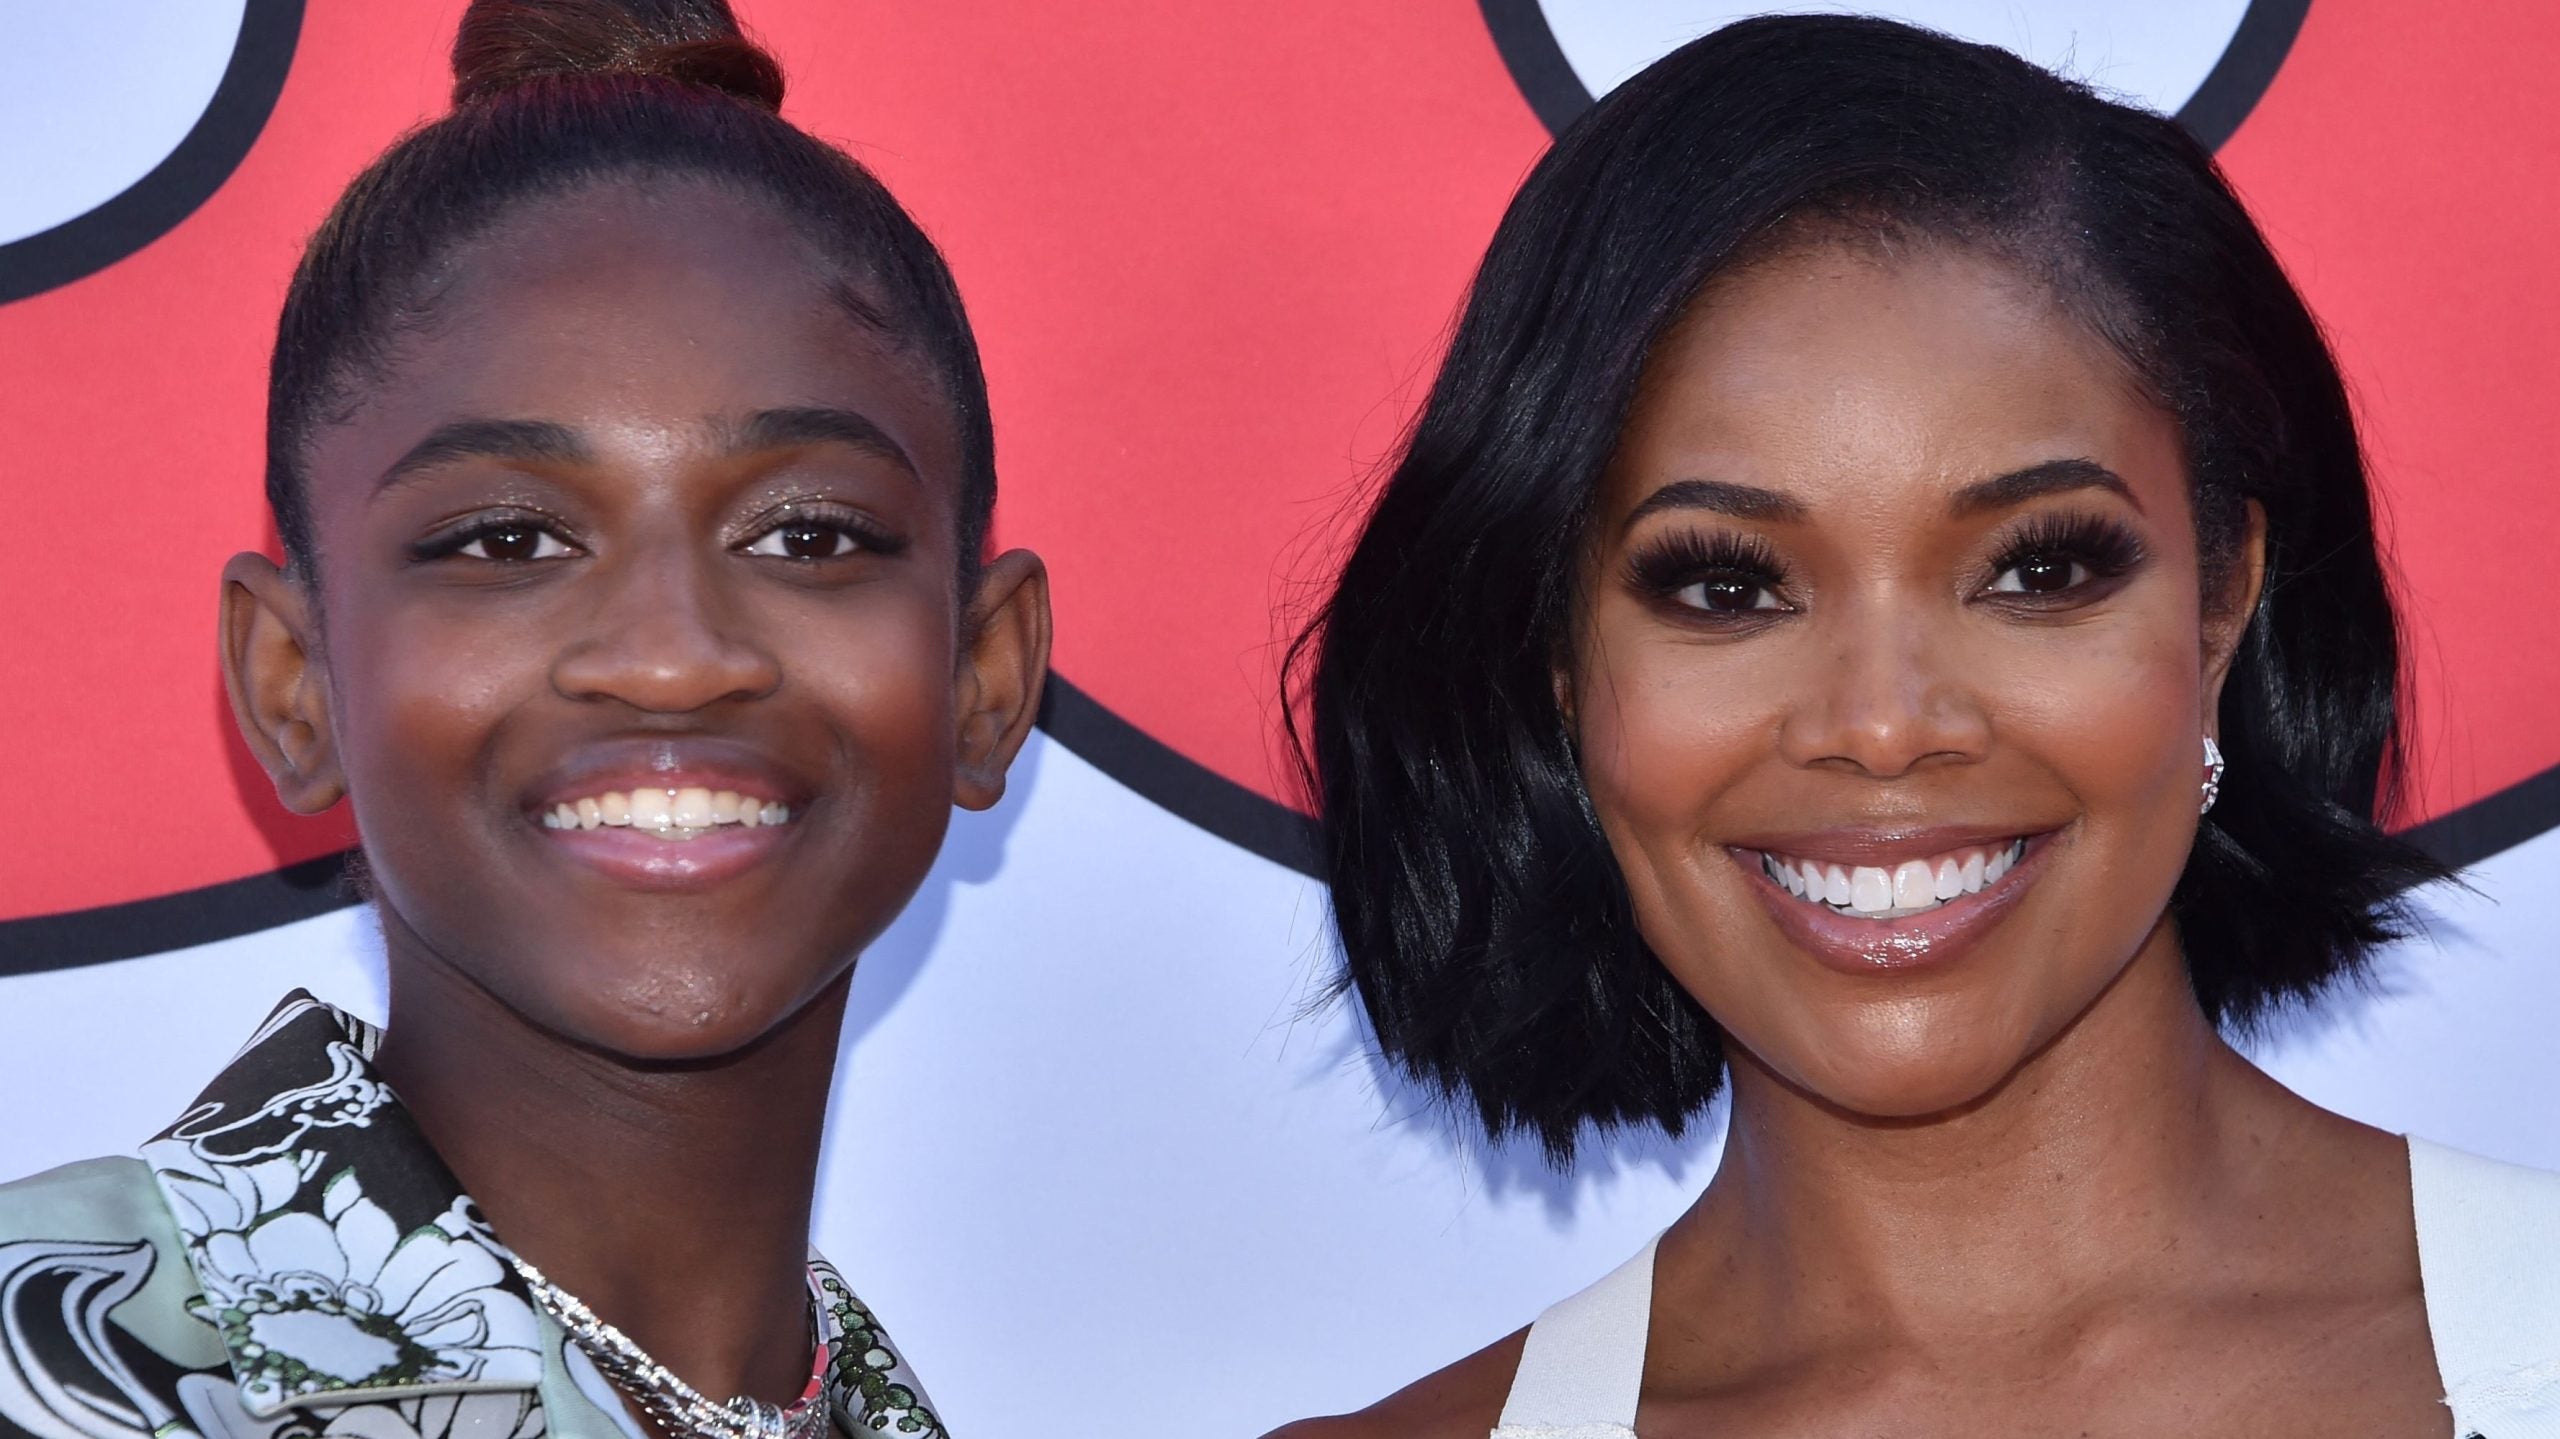 ‘It’s Tough’: Gabrielle Union-Wade On How New Film Reflects Zaya Wade’s Present Challenges